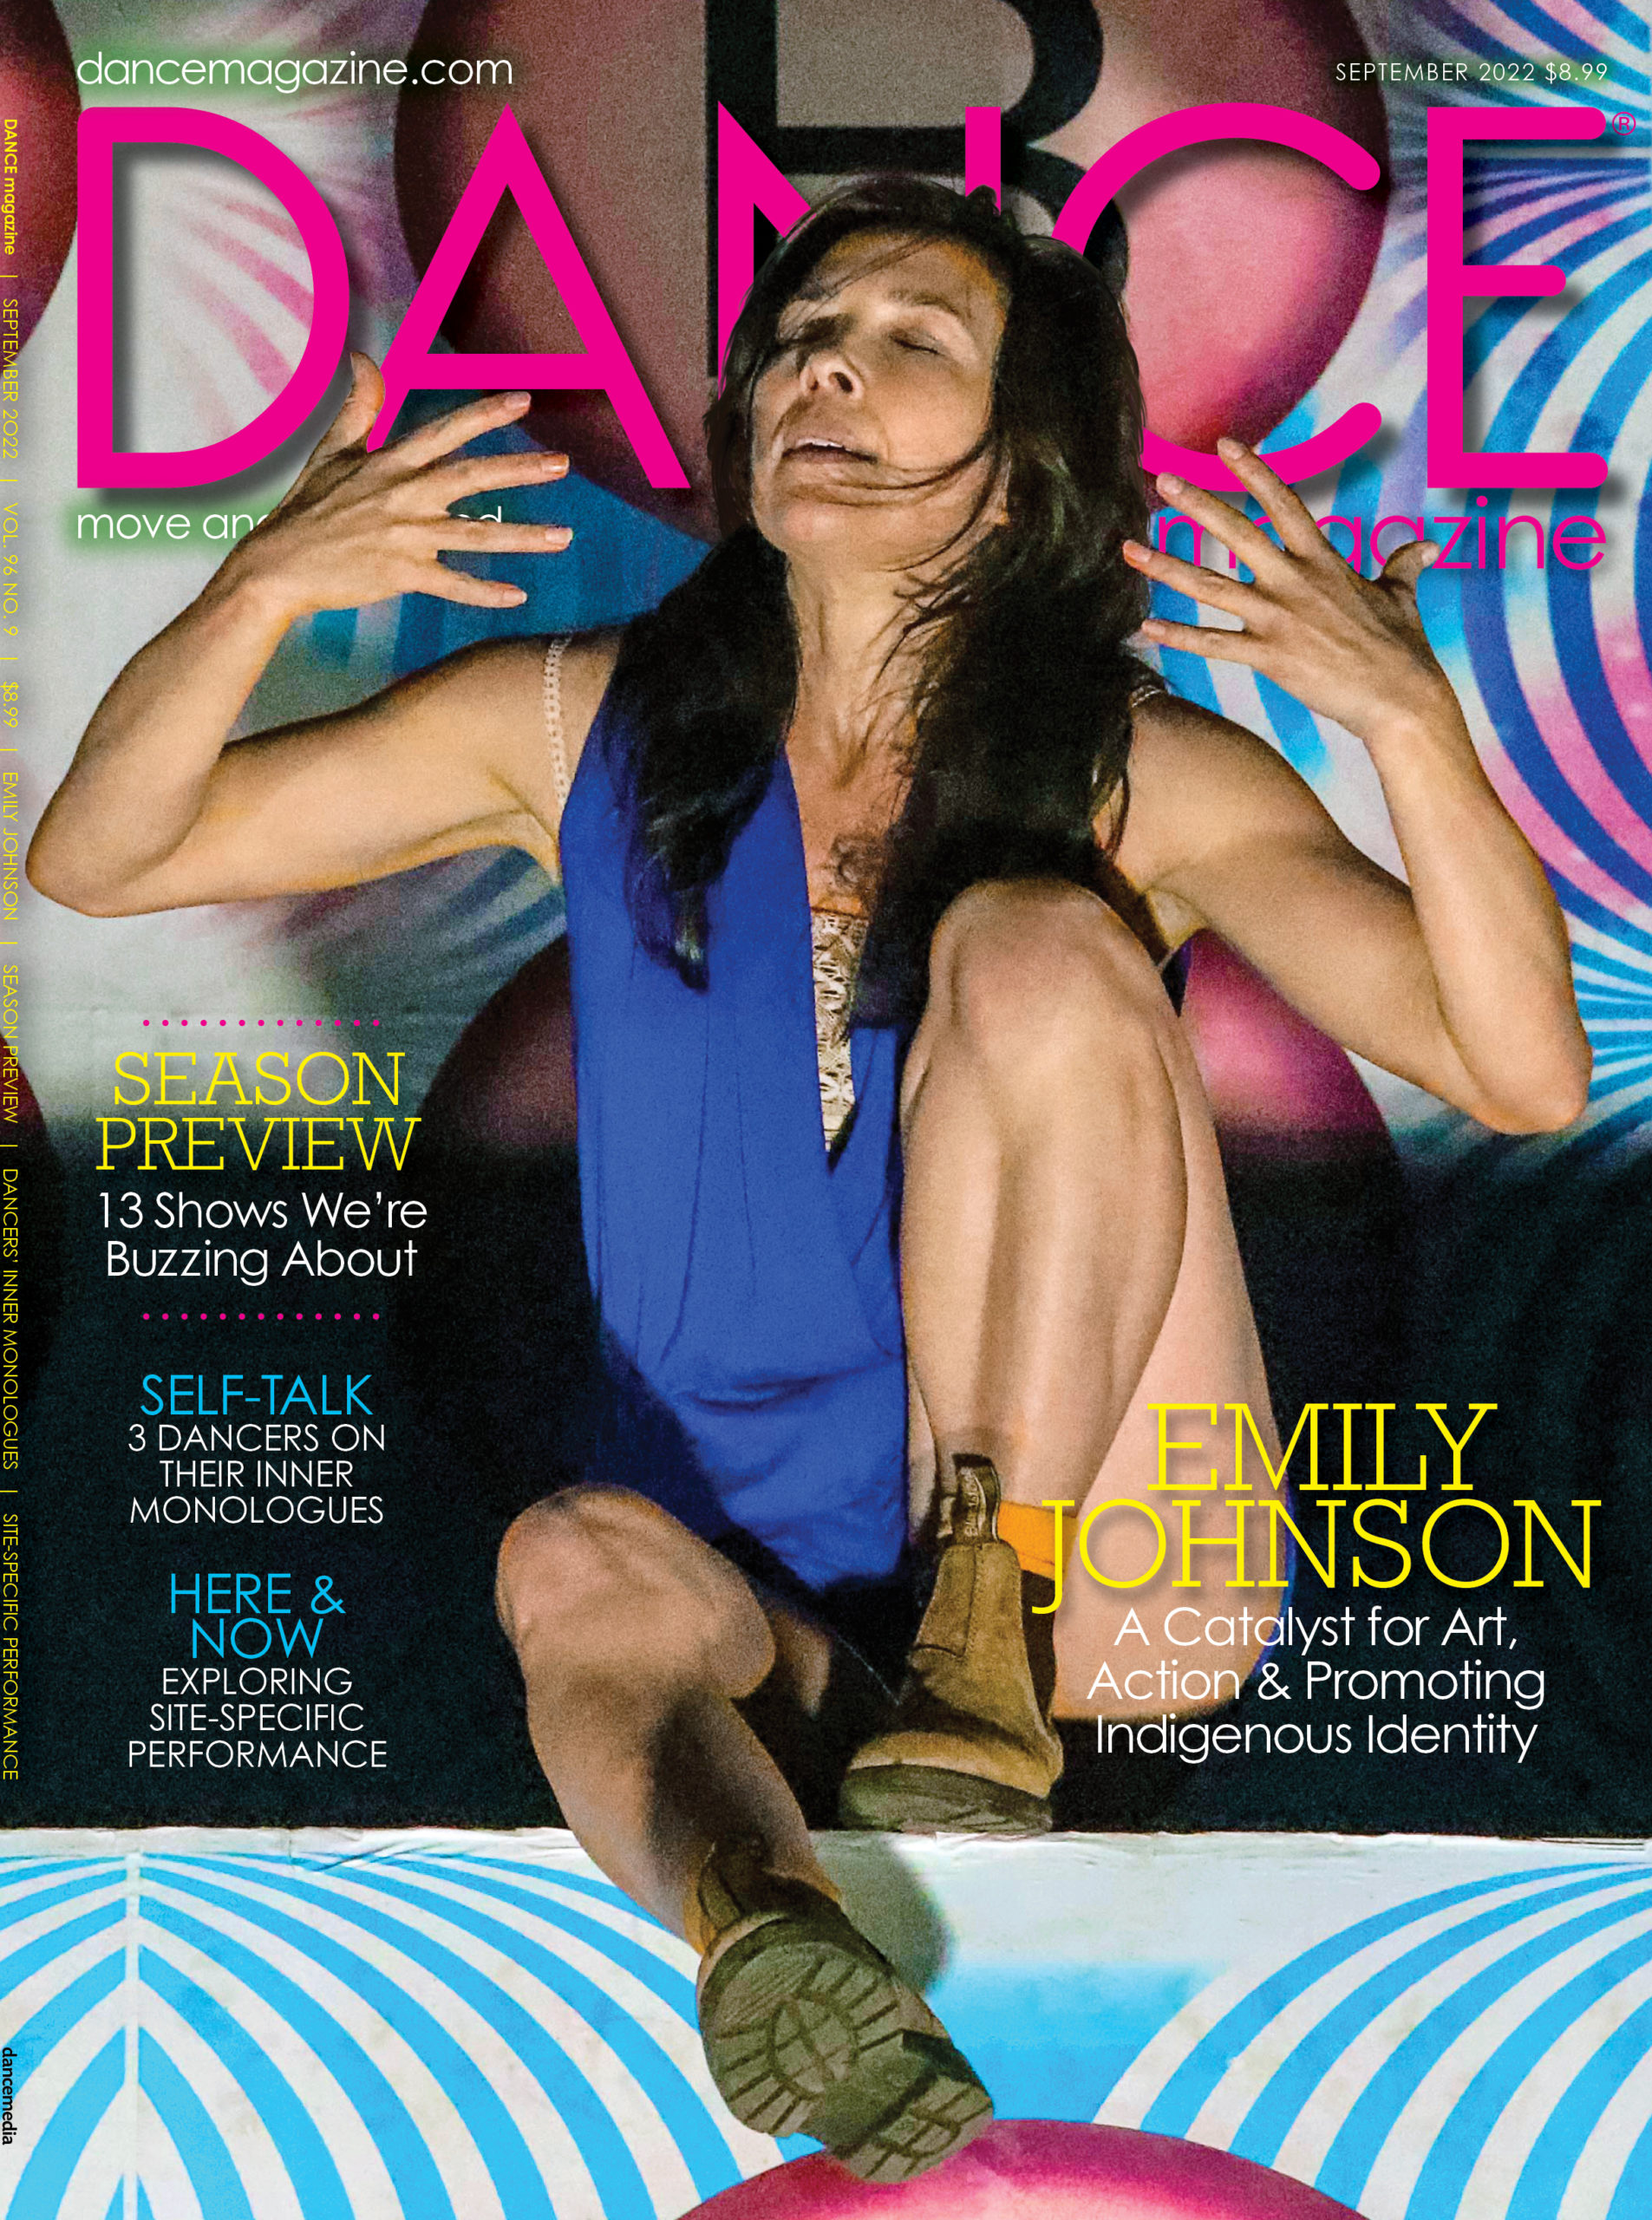 The cover of the September 2022 issue of Dance Magazine. Emily Johnson is seated, eyes closed and chine tips up as she brings splayed hands towards her face, dark hair loose around her shoulders. One knee is tucked up beneath her, foot planted, while the other is kicked out in front, dangling off a ledge. Around her, white and blue swirls and pink circles, pieces of an artwork we're too close to see fully.